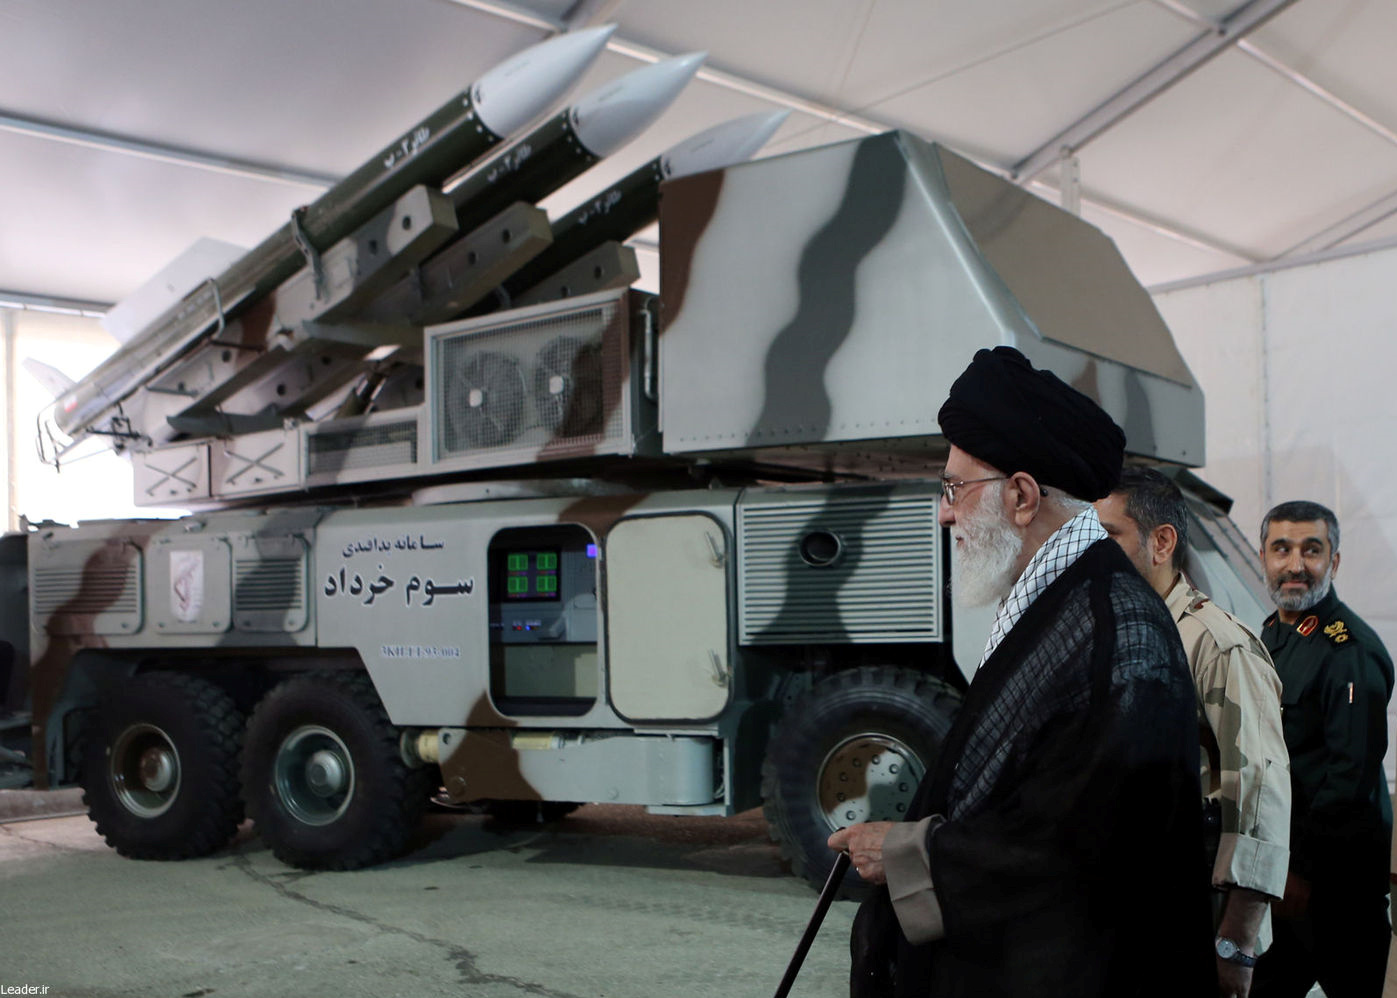 Iran's Supreme Leader Ayatollah Ali Khamenei is seen near a "3 Khordad" system which is said to had been used to shoot down a U.S. military drone